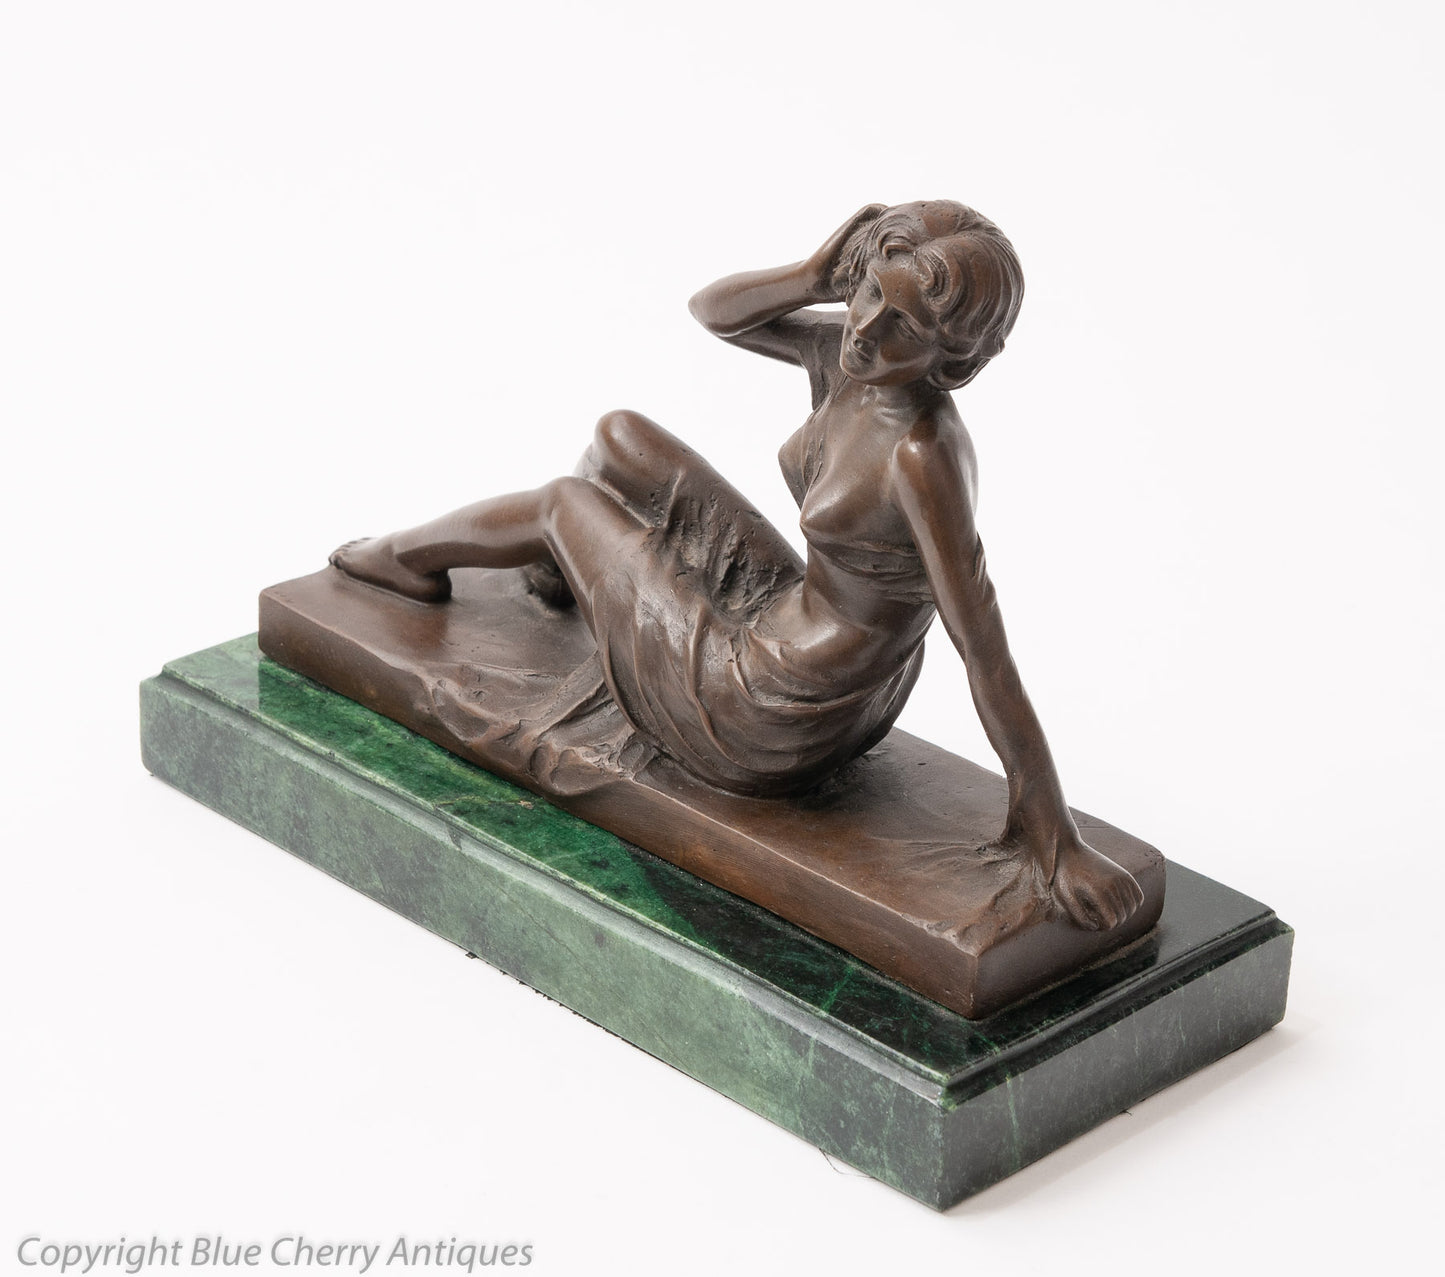 Art Deco Design Patinated Bronze Figure of Reclining Female on Green Marble Base (Code 1578)